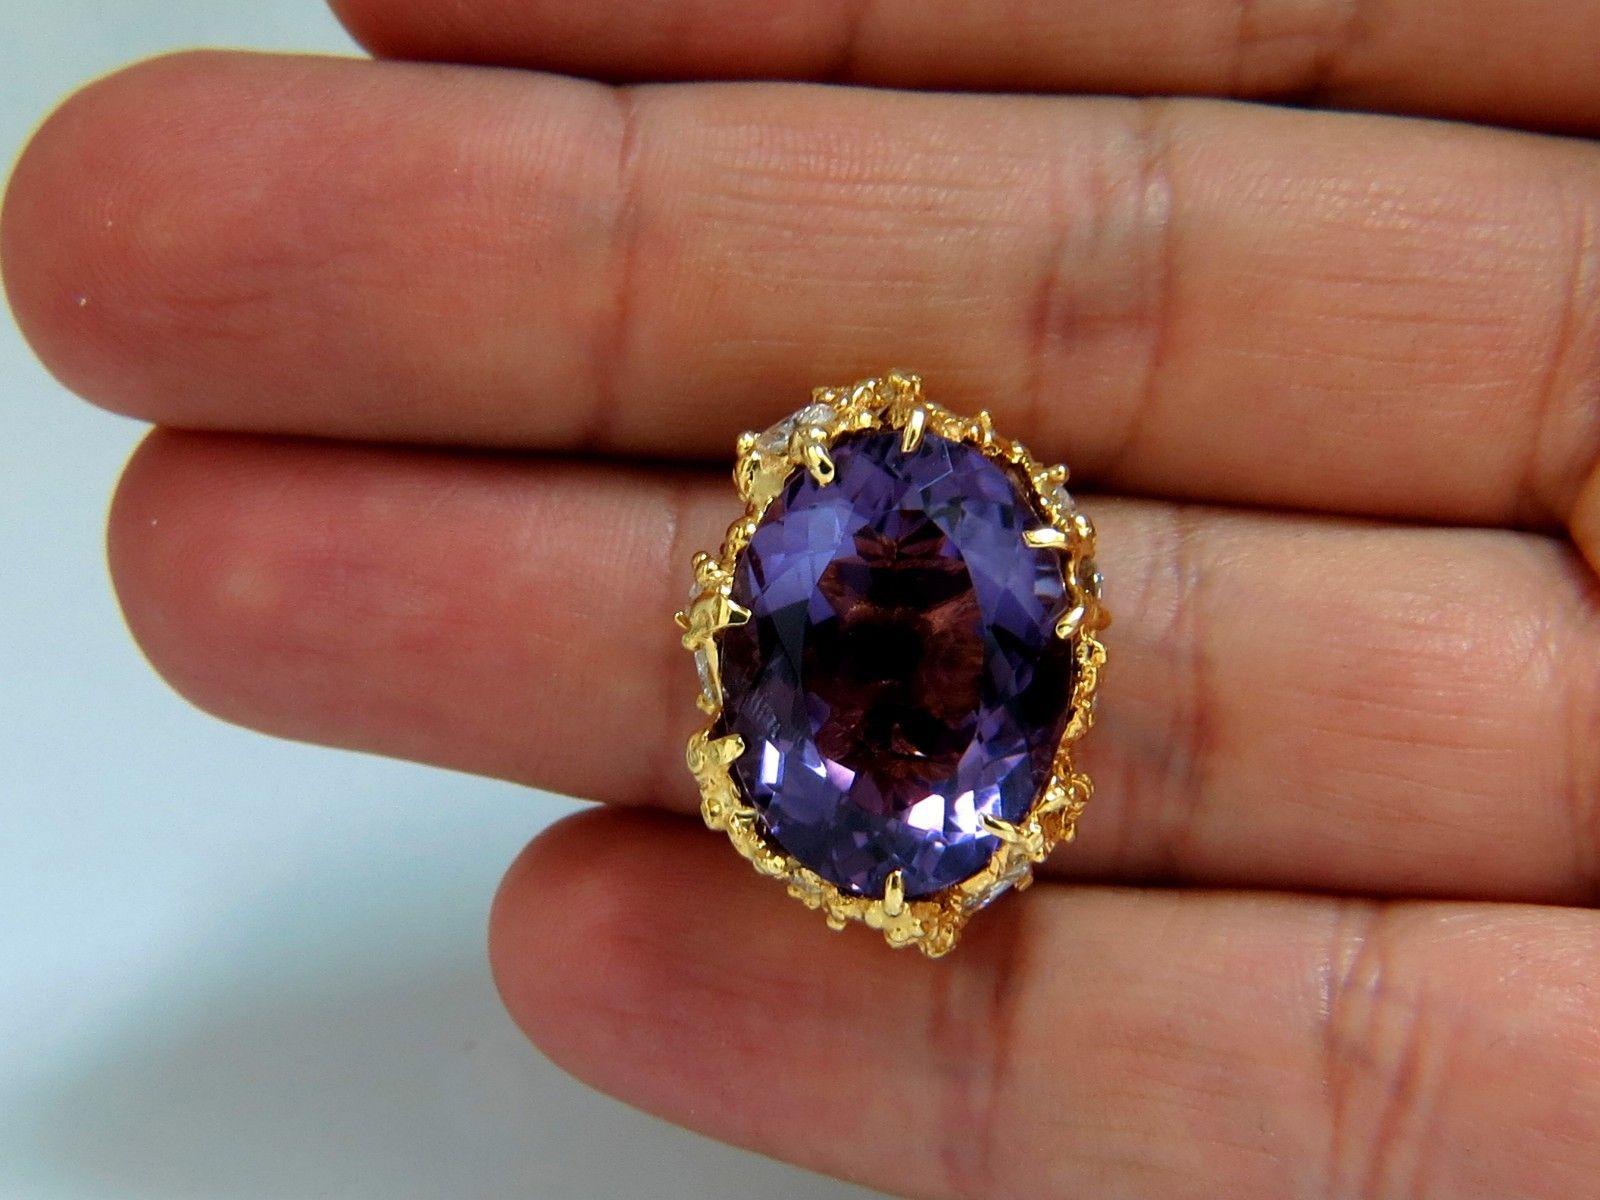 Purple Nugget Class

16ct. Natural Amethyst ring

Oval cut, Full cut Brilliant

20 X 15mm 

Clean Clarity & Transparent

The Prime Purple Velvet Color

3.30ct natural assorted cut diamonds.

Si-1 Si-2 clarity.

  14kt. yellow gold

13.7 Grams

Deck